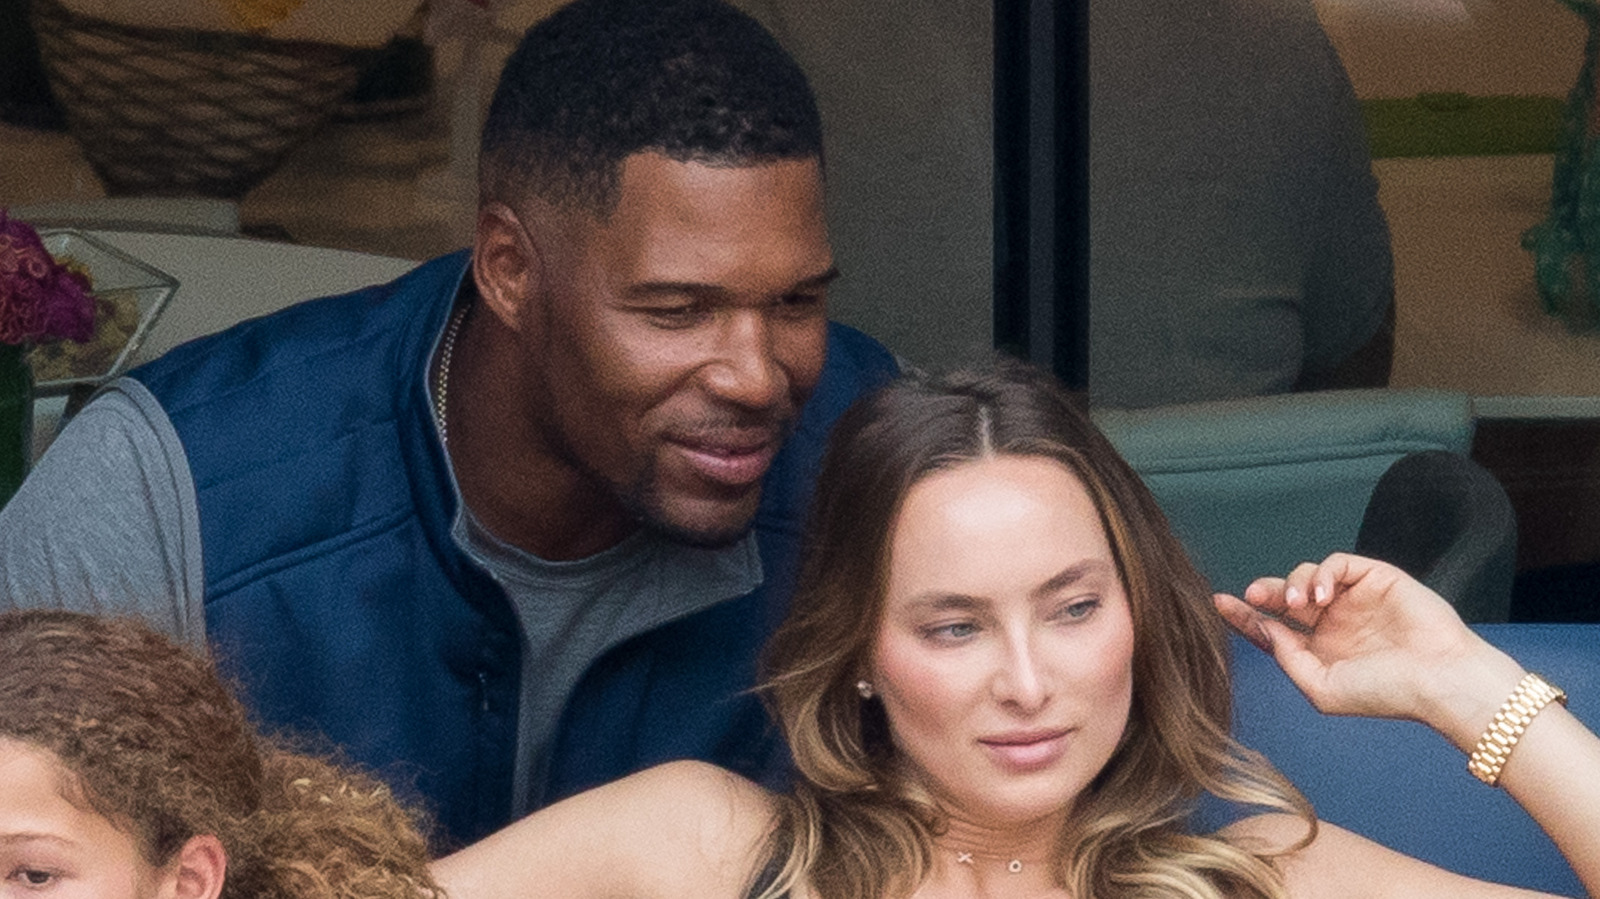 Michael Strahan's Girlfriend, Kayla Quick, Has A History Of Legal Trouble